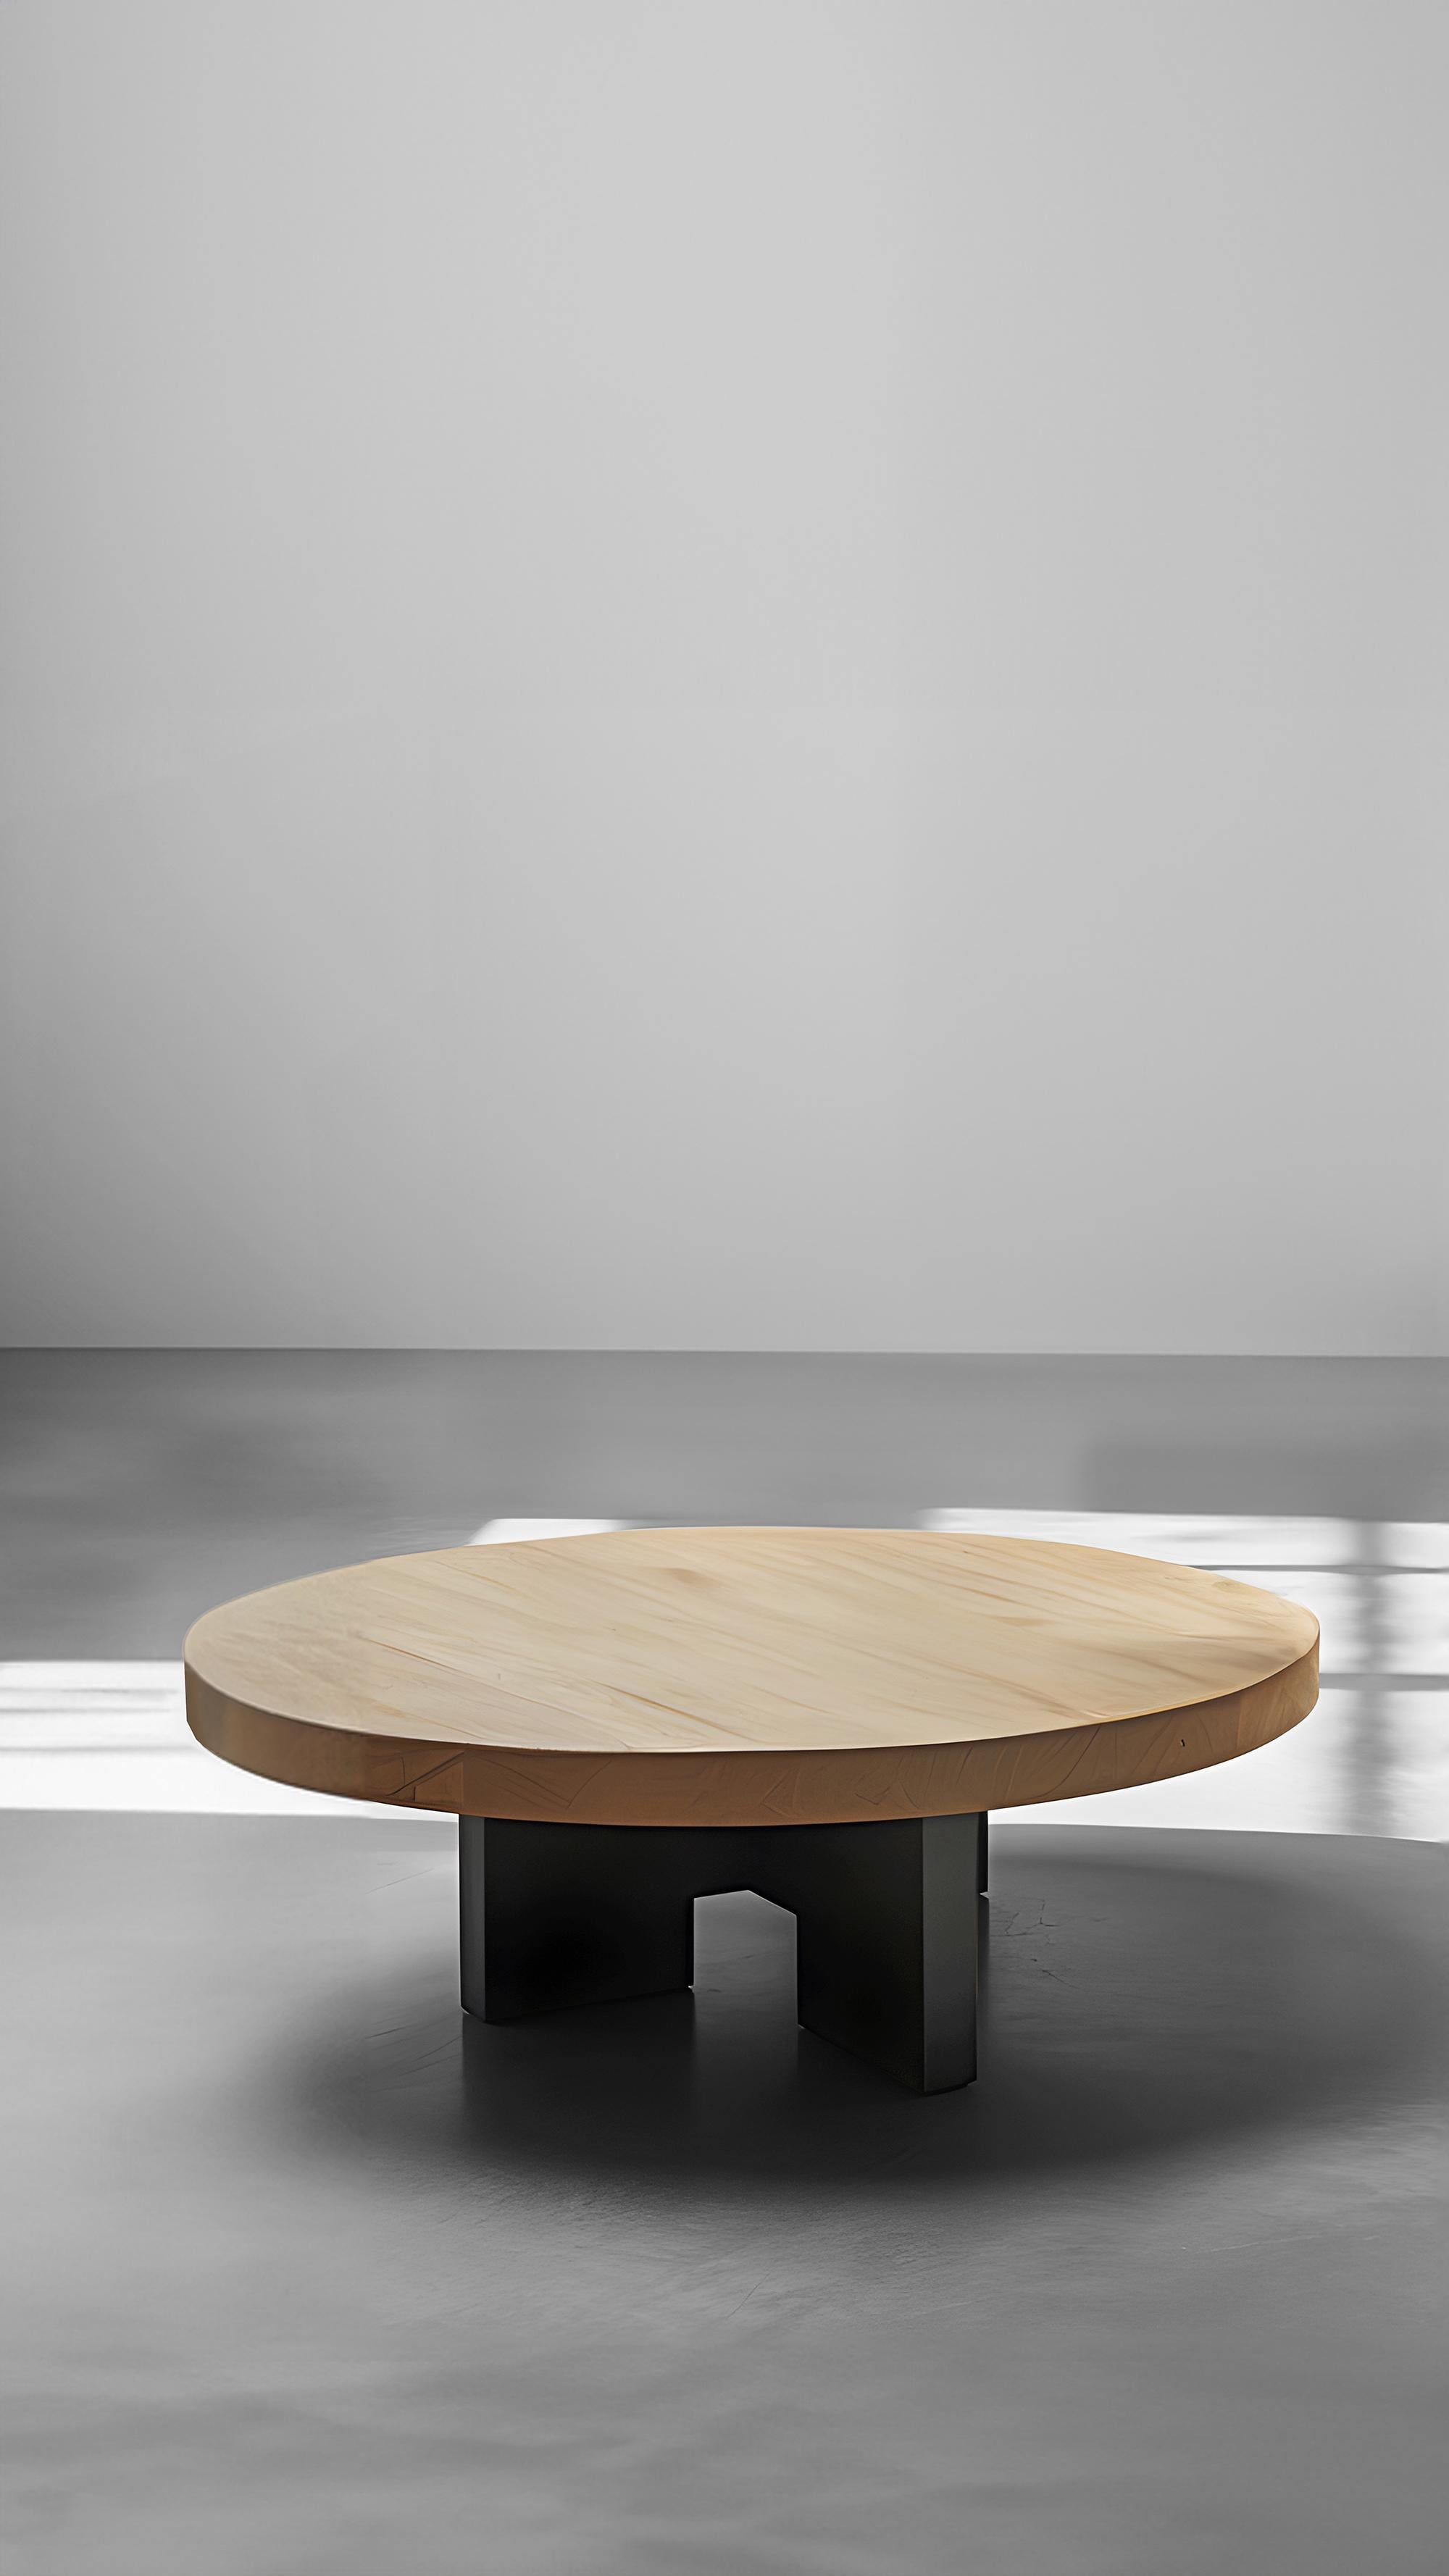 Mexican Fundamenta Geometric Coffee Table 56 Round Solid Wood, Modern Style by NONO For Sale